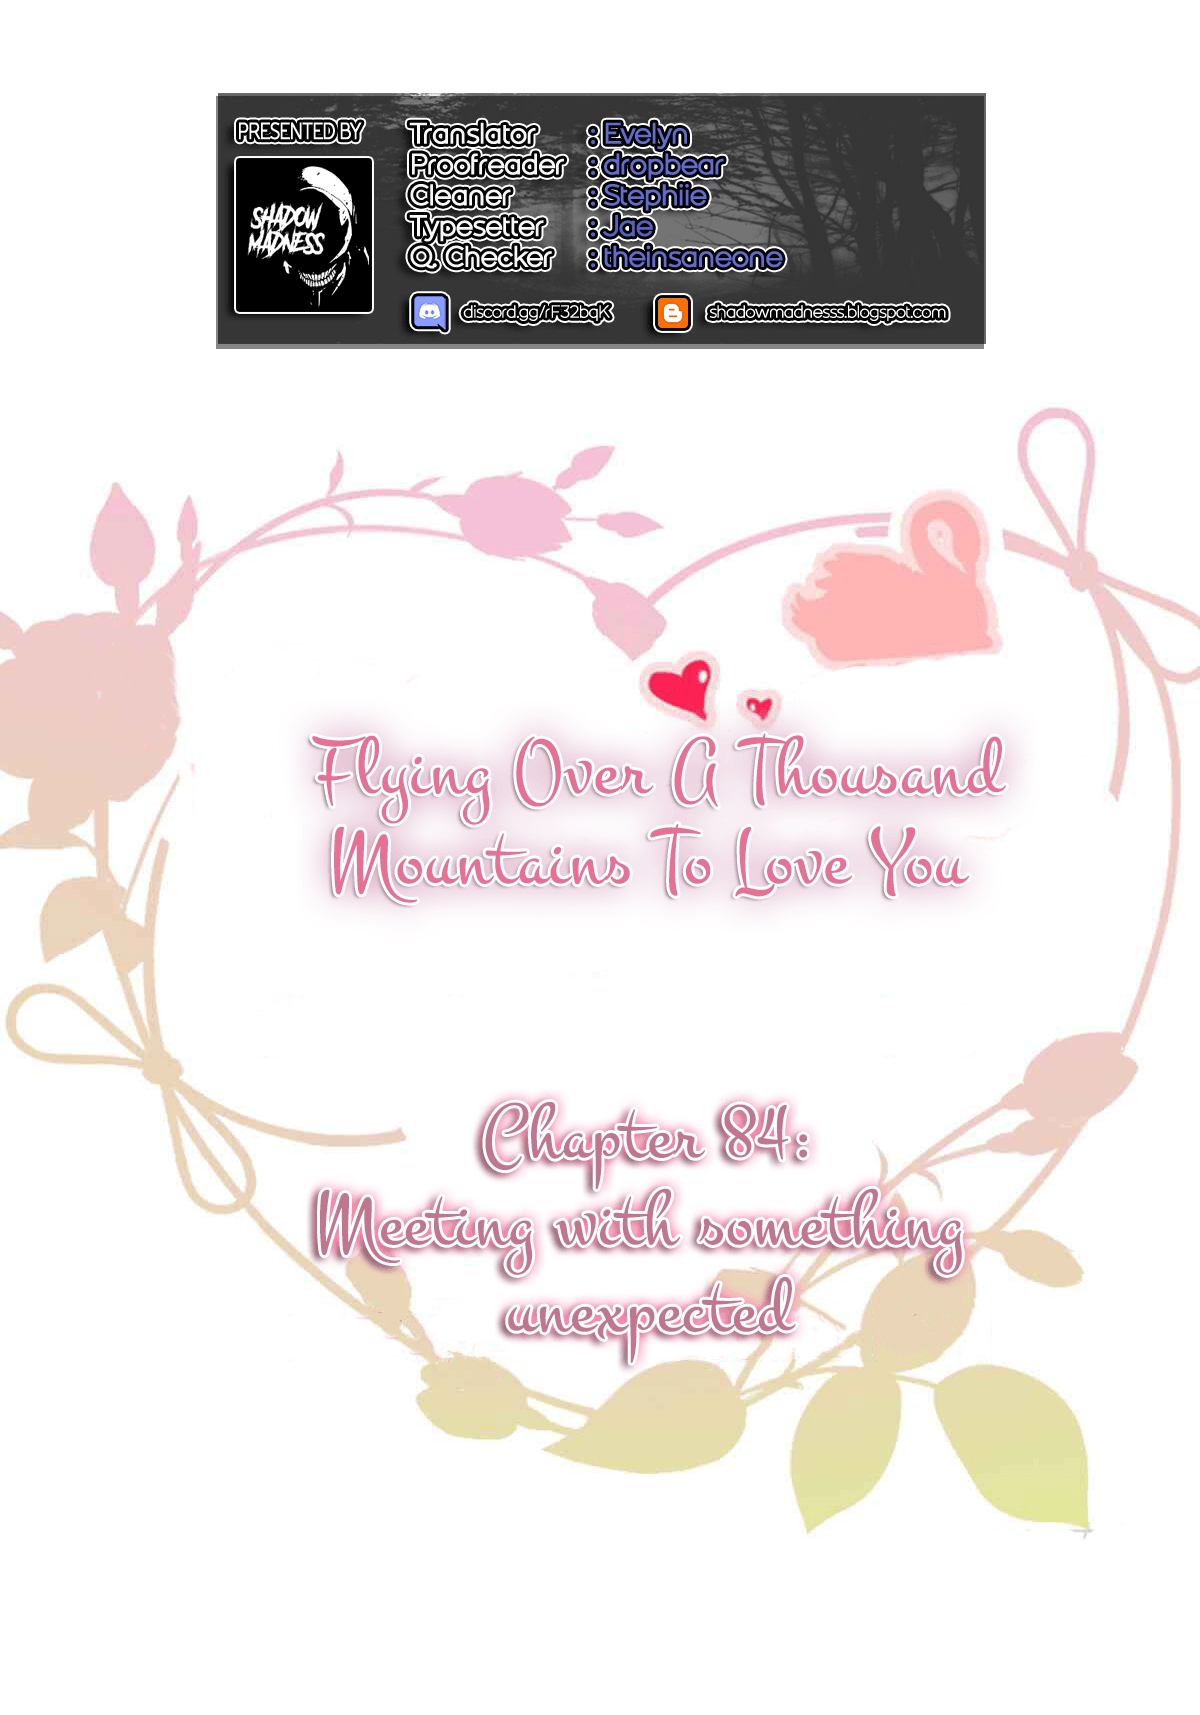 Flying Over a Thousand Mountains to Love You Ch. 84 Meeting with something unexpected